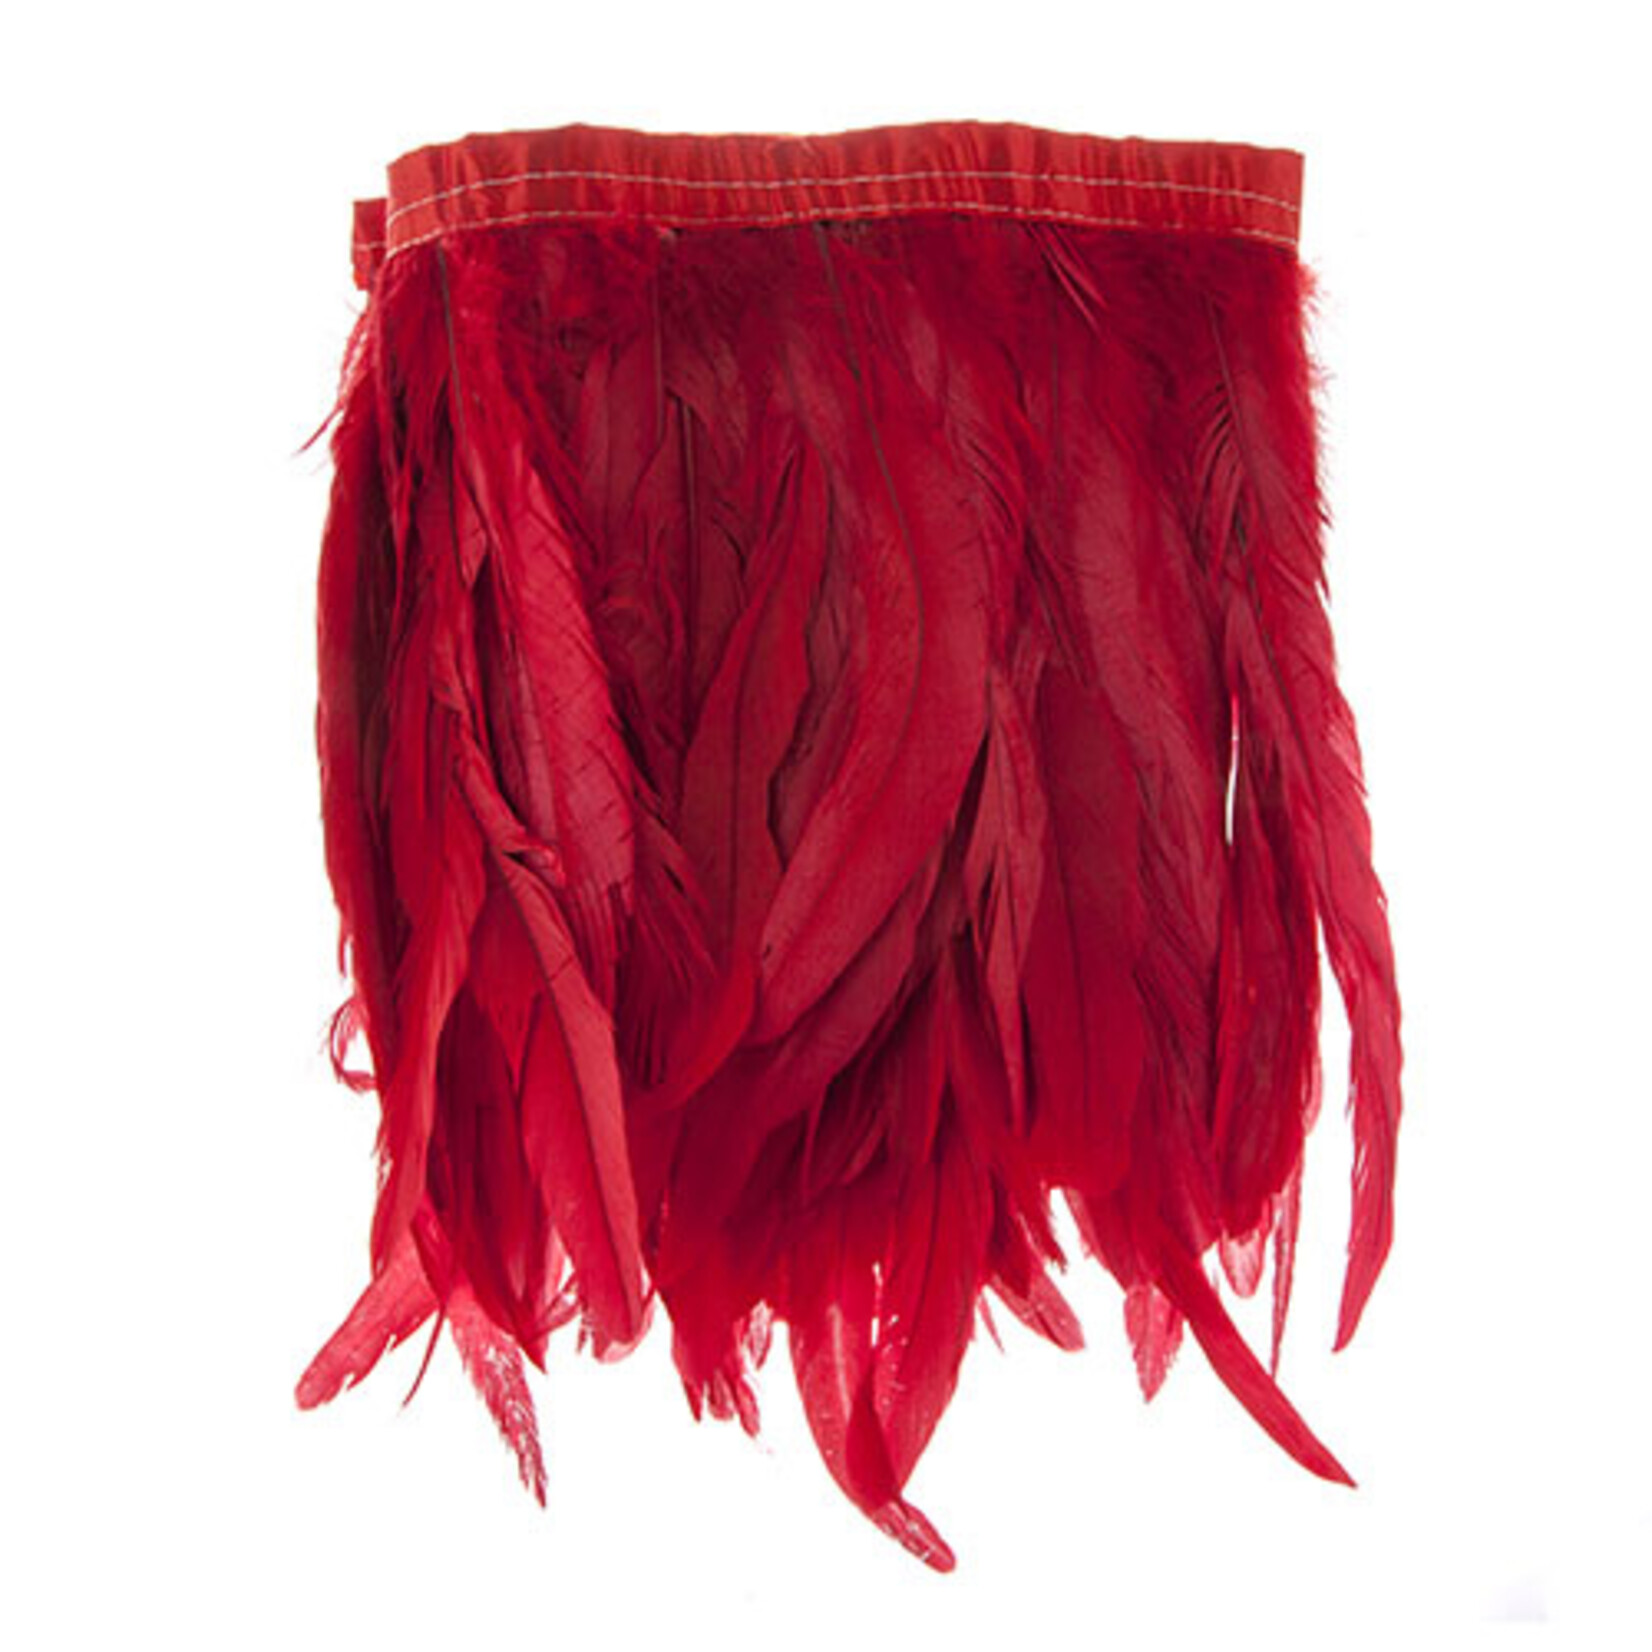 Coque Feathers Value 8-10 Inches 1 Yard  Red